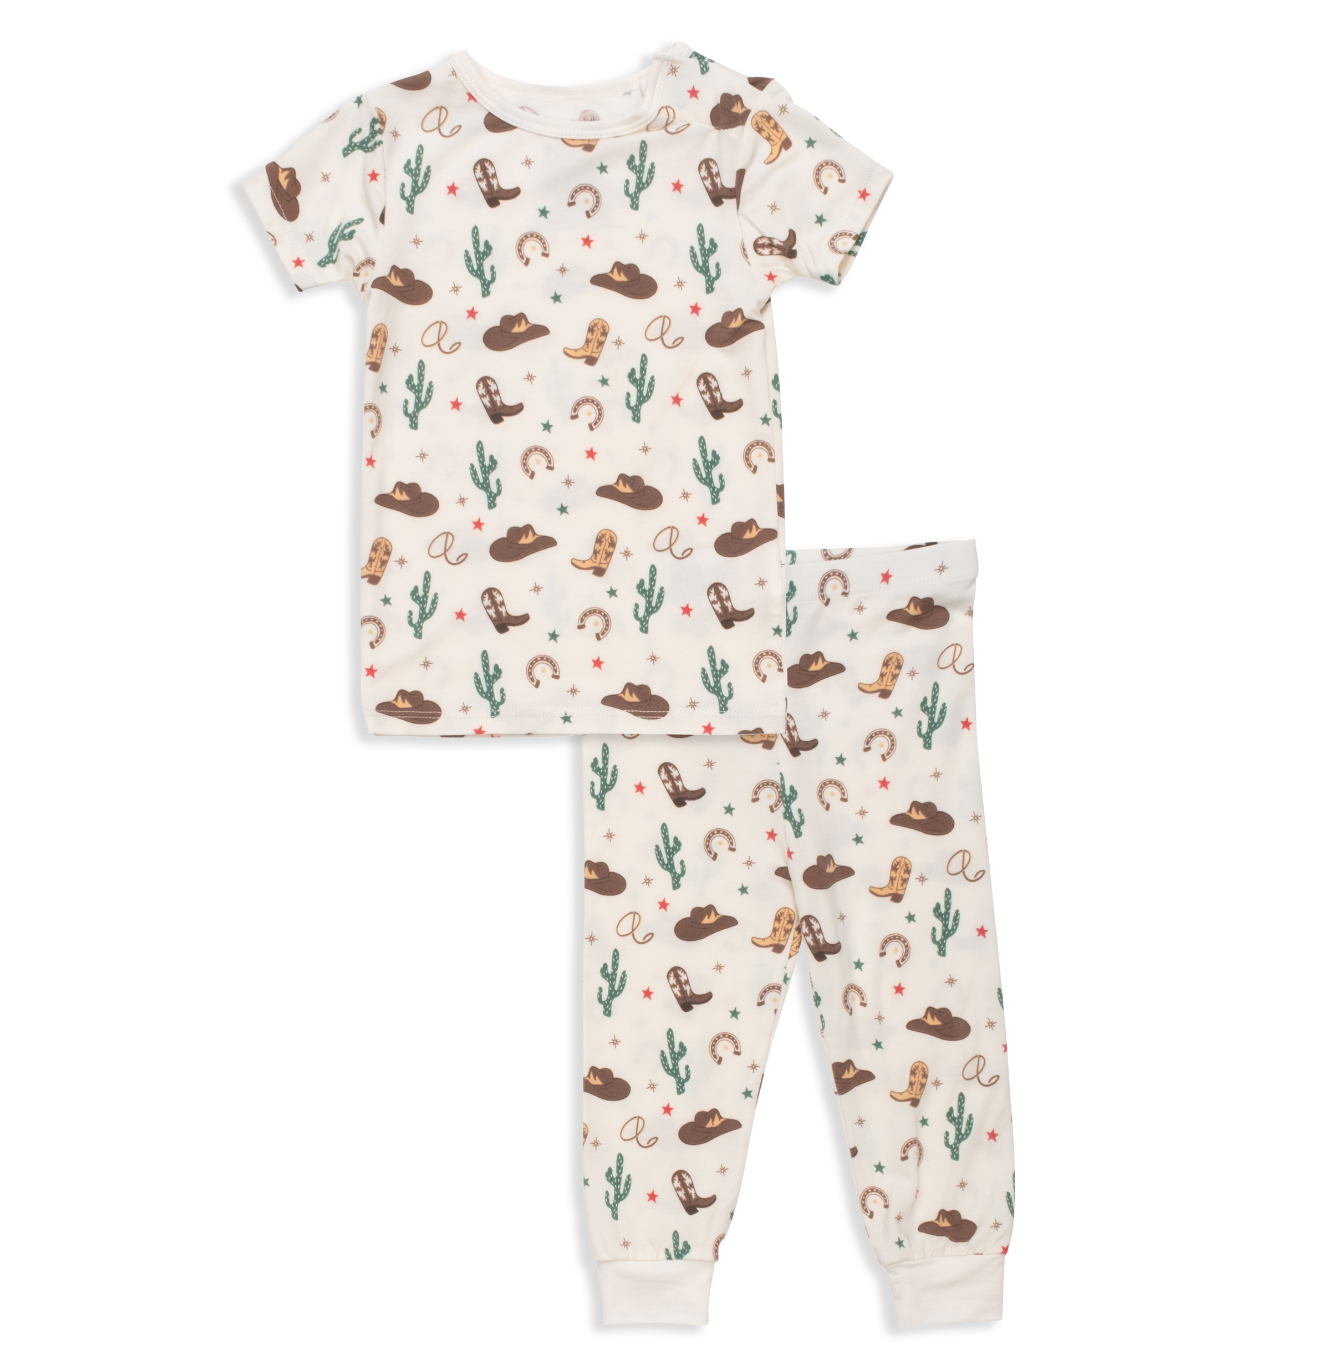 Not My First Rodeo Infant 2pc Pj Set